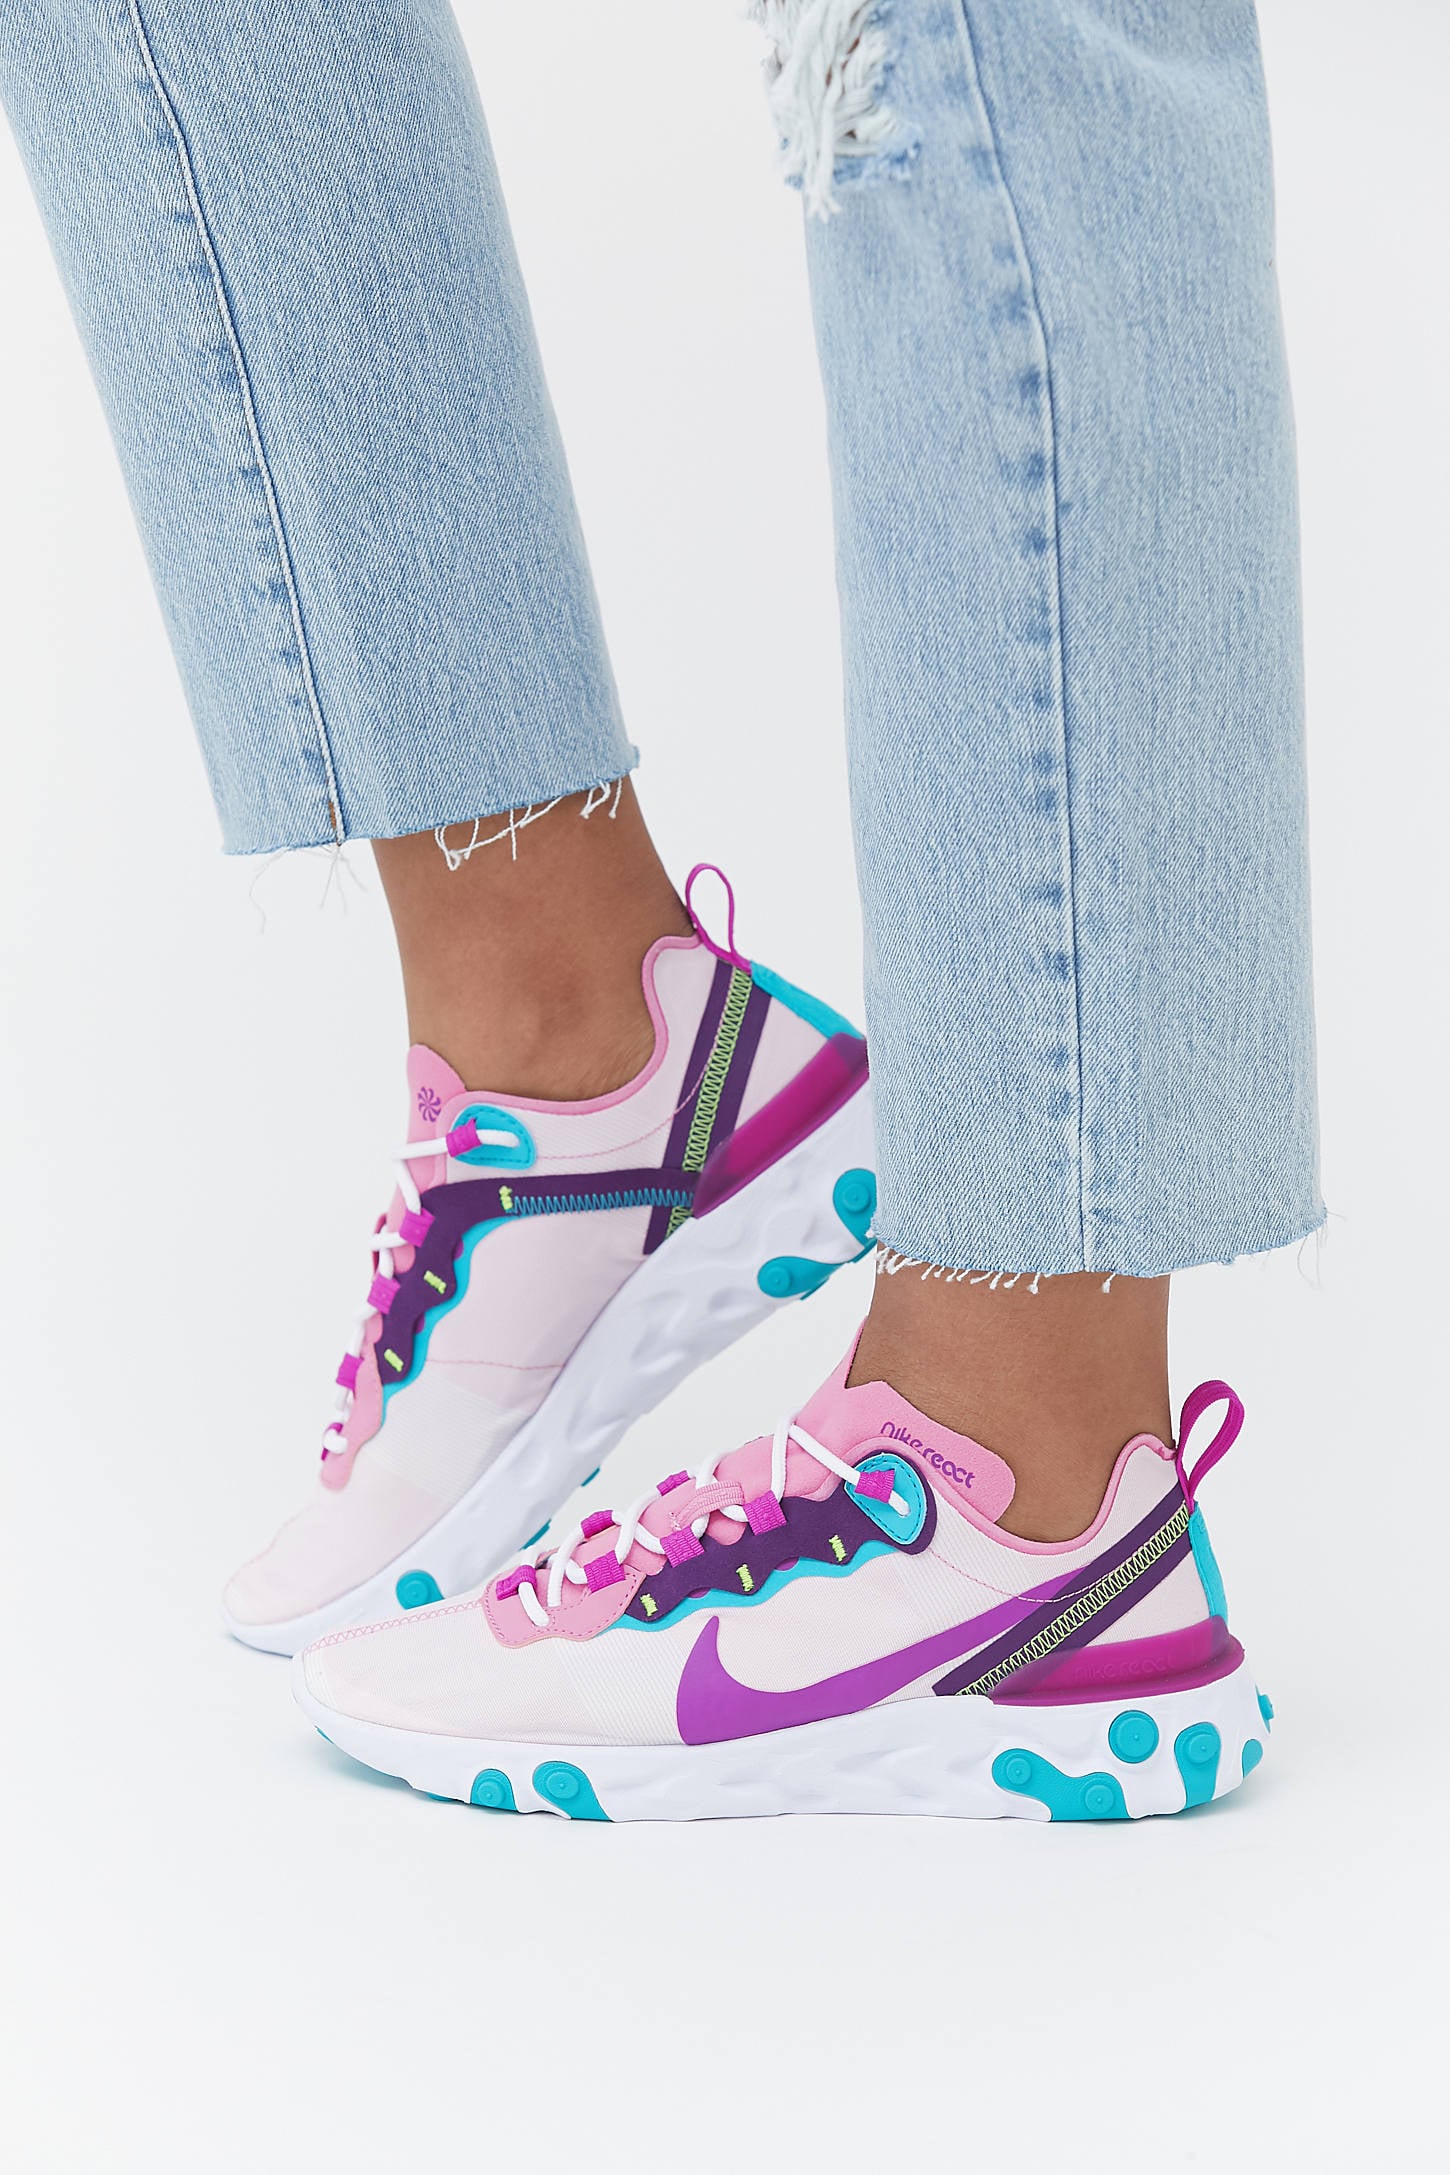 purple and blue nikes